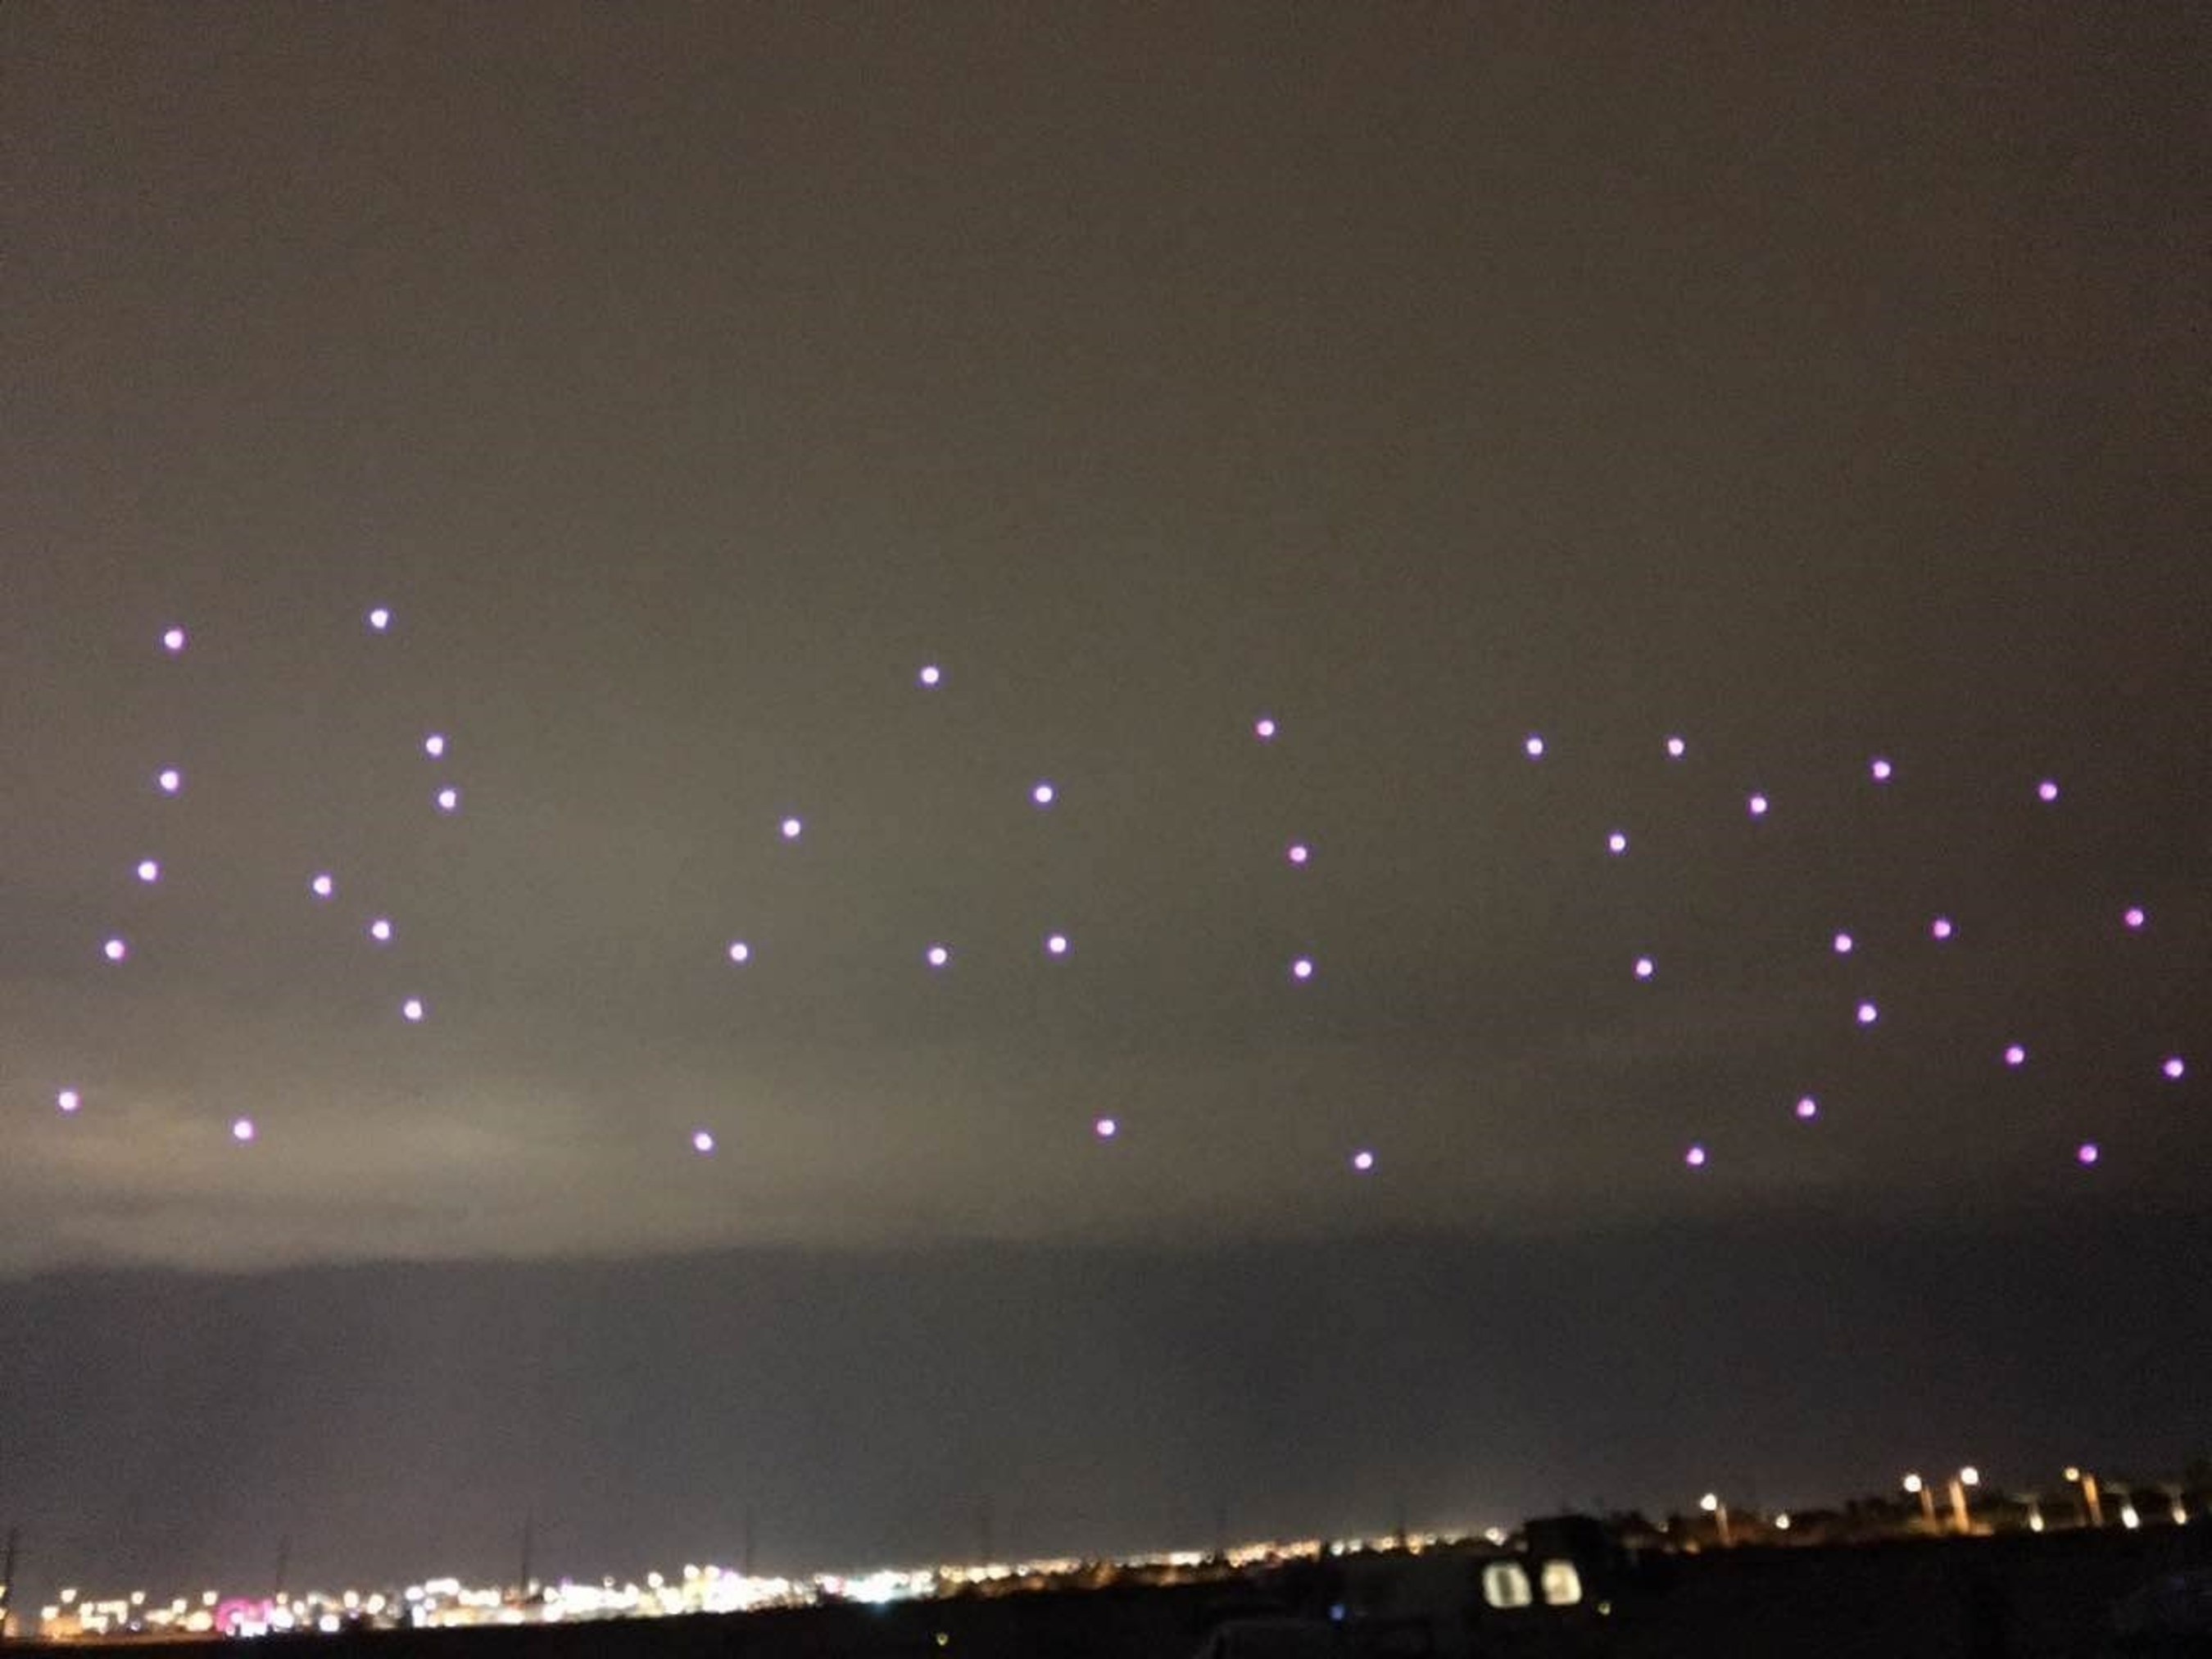 UAVs in the Format of Baidu Greeting to the BlackHat